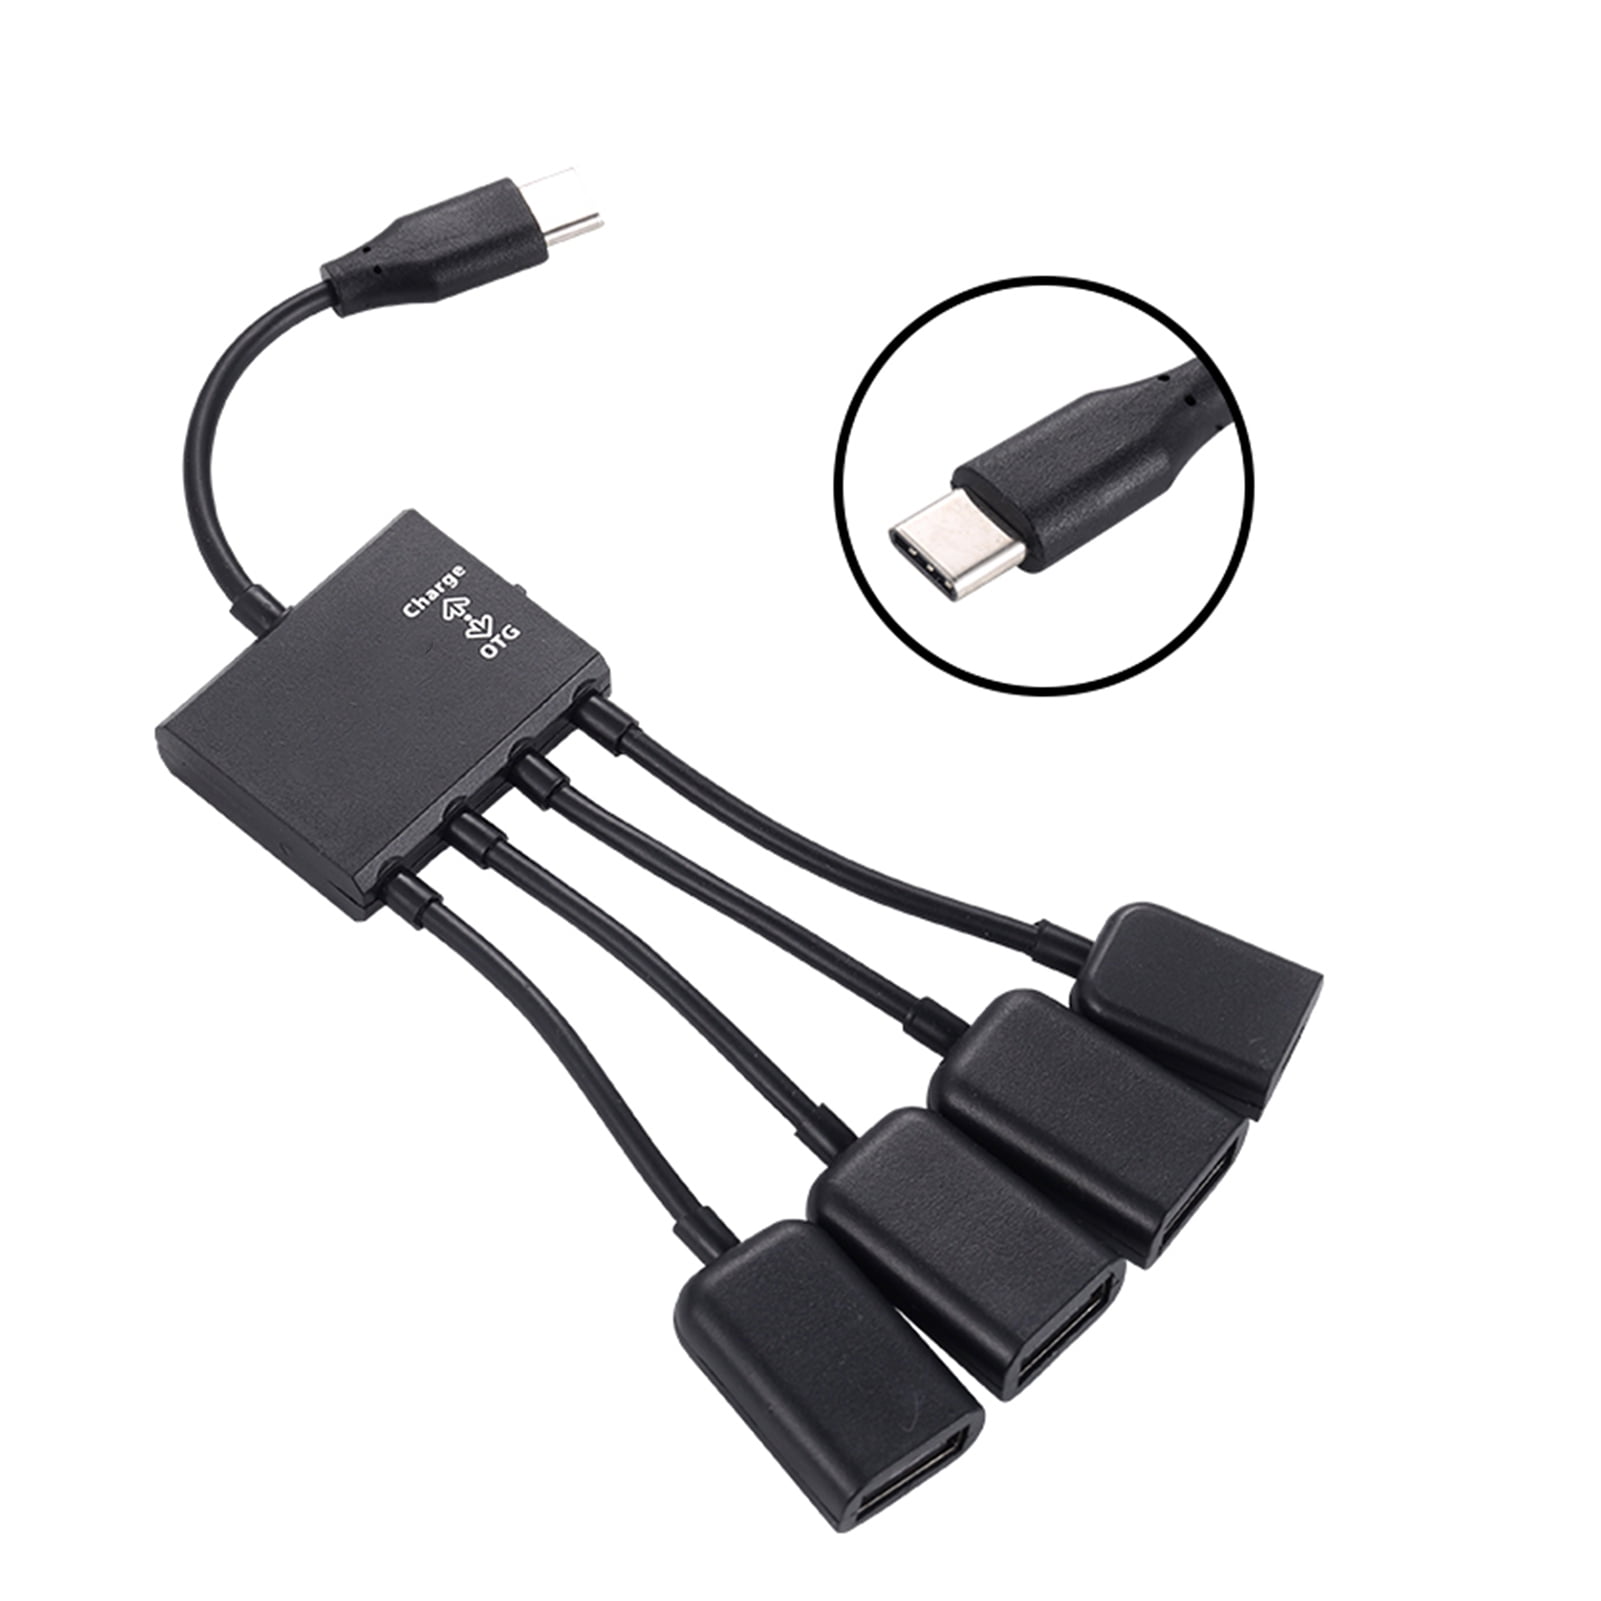 OTG Cable, Adapter Cable Micro-USB Data Transmission 1 to 4 Type-c USB Converter Cable for Mobile Phone Laptop - Walmart.com